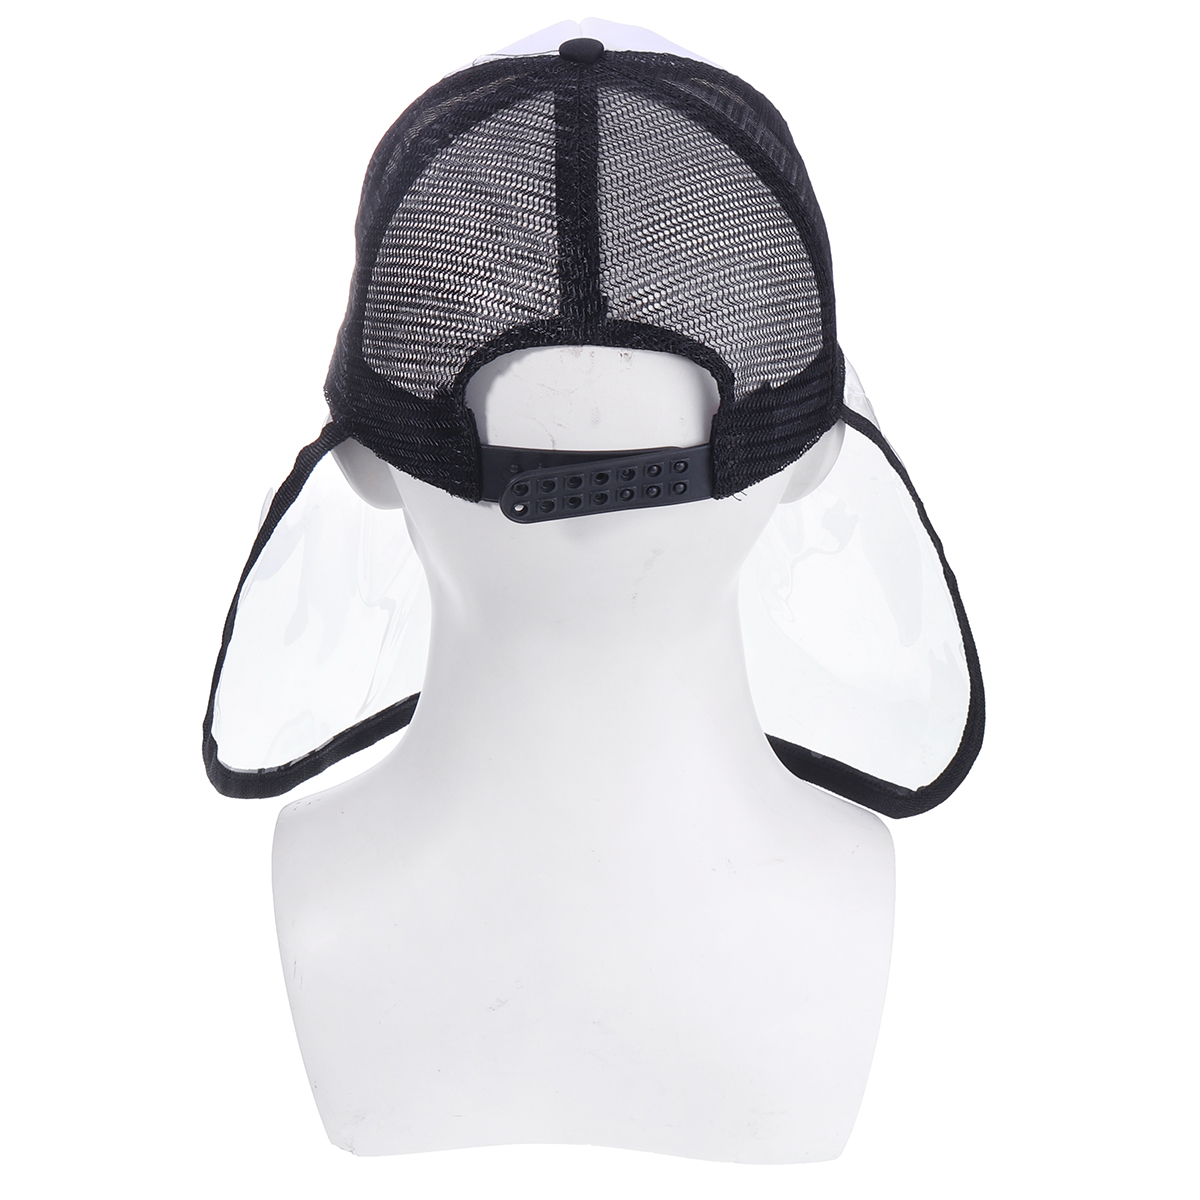 Anti-spitting-Protective-Hat-Dustproof-Cover-Peaked-Cap-Fisherman-Sun-protection-1659915-1